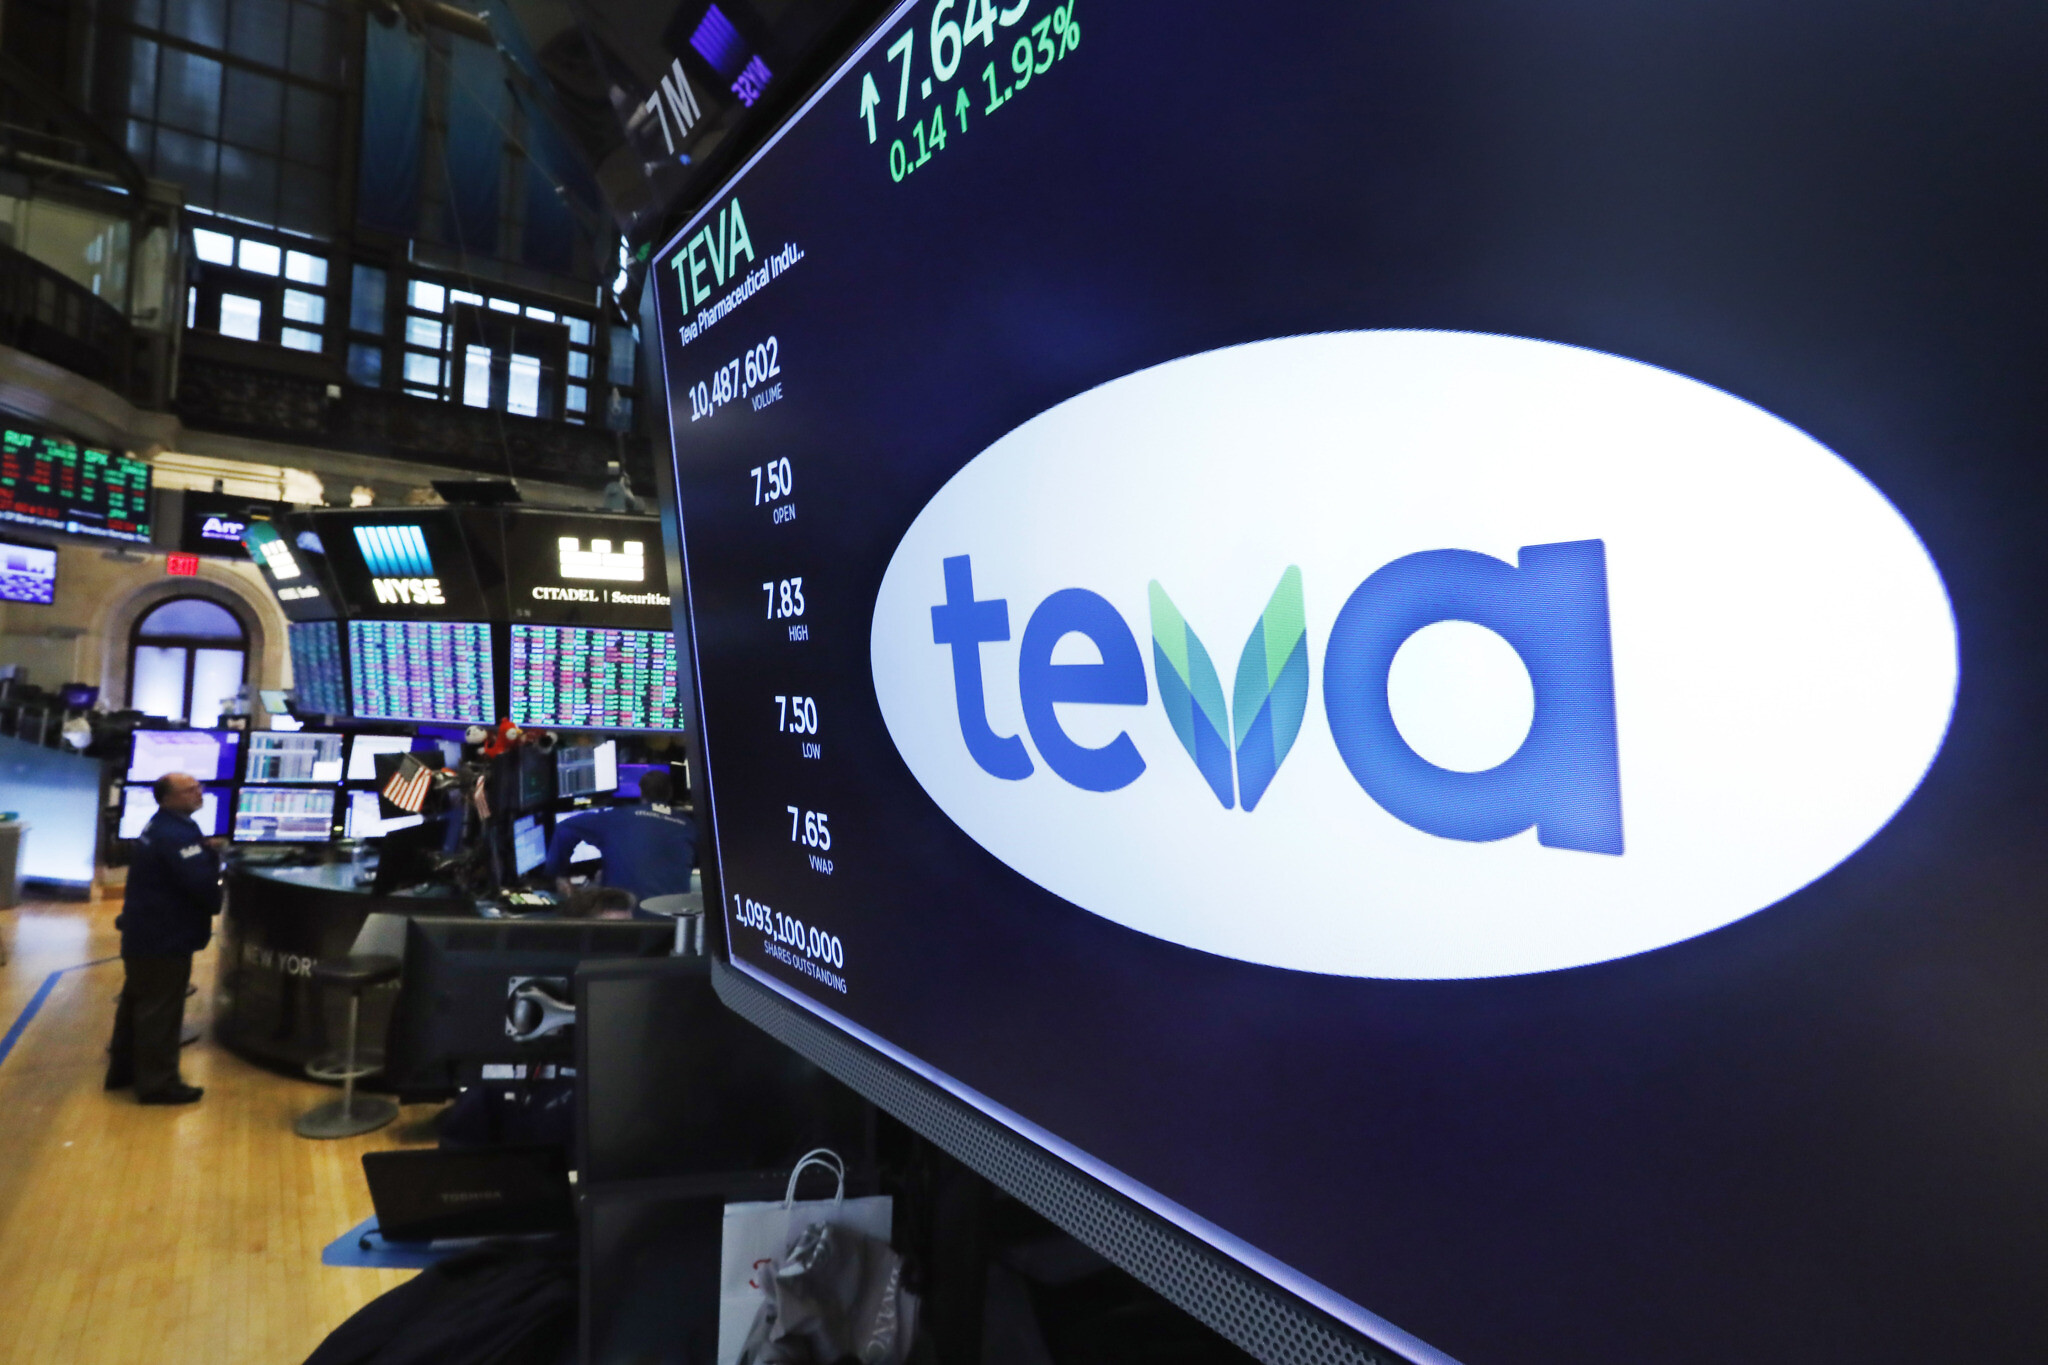 company boss faces trading charges over Teva deal | The Times of Israel